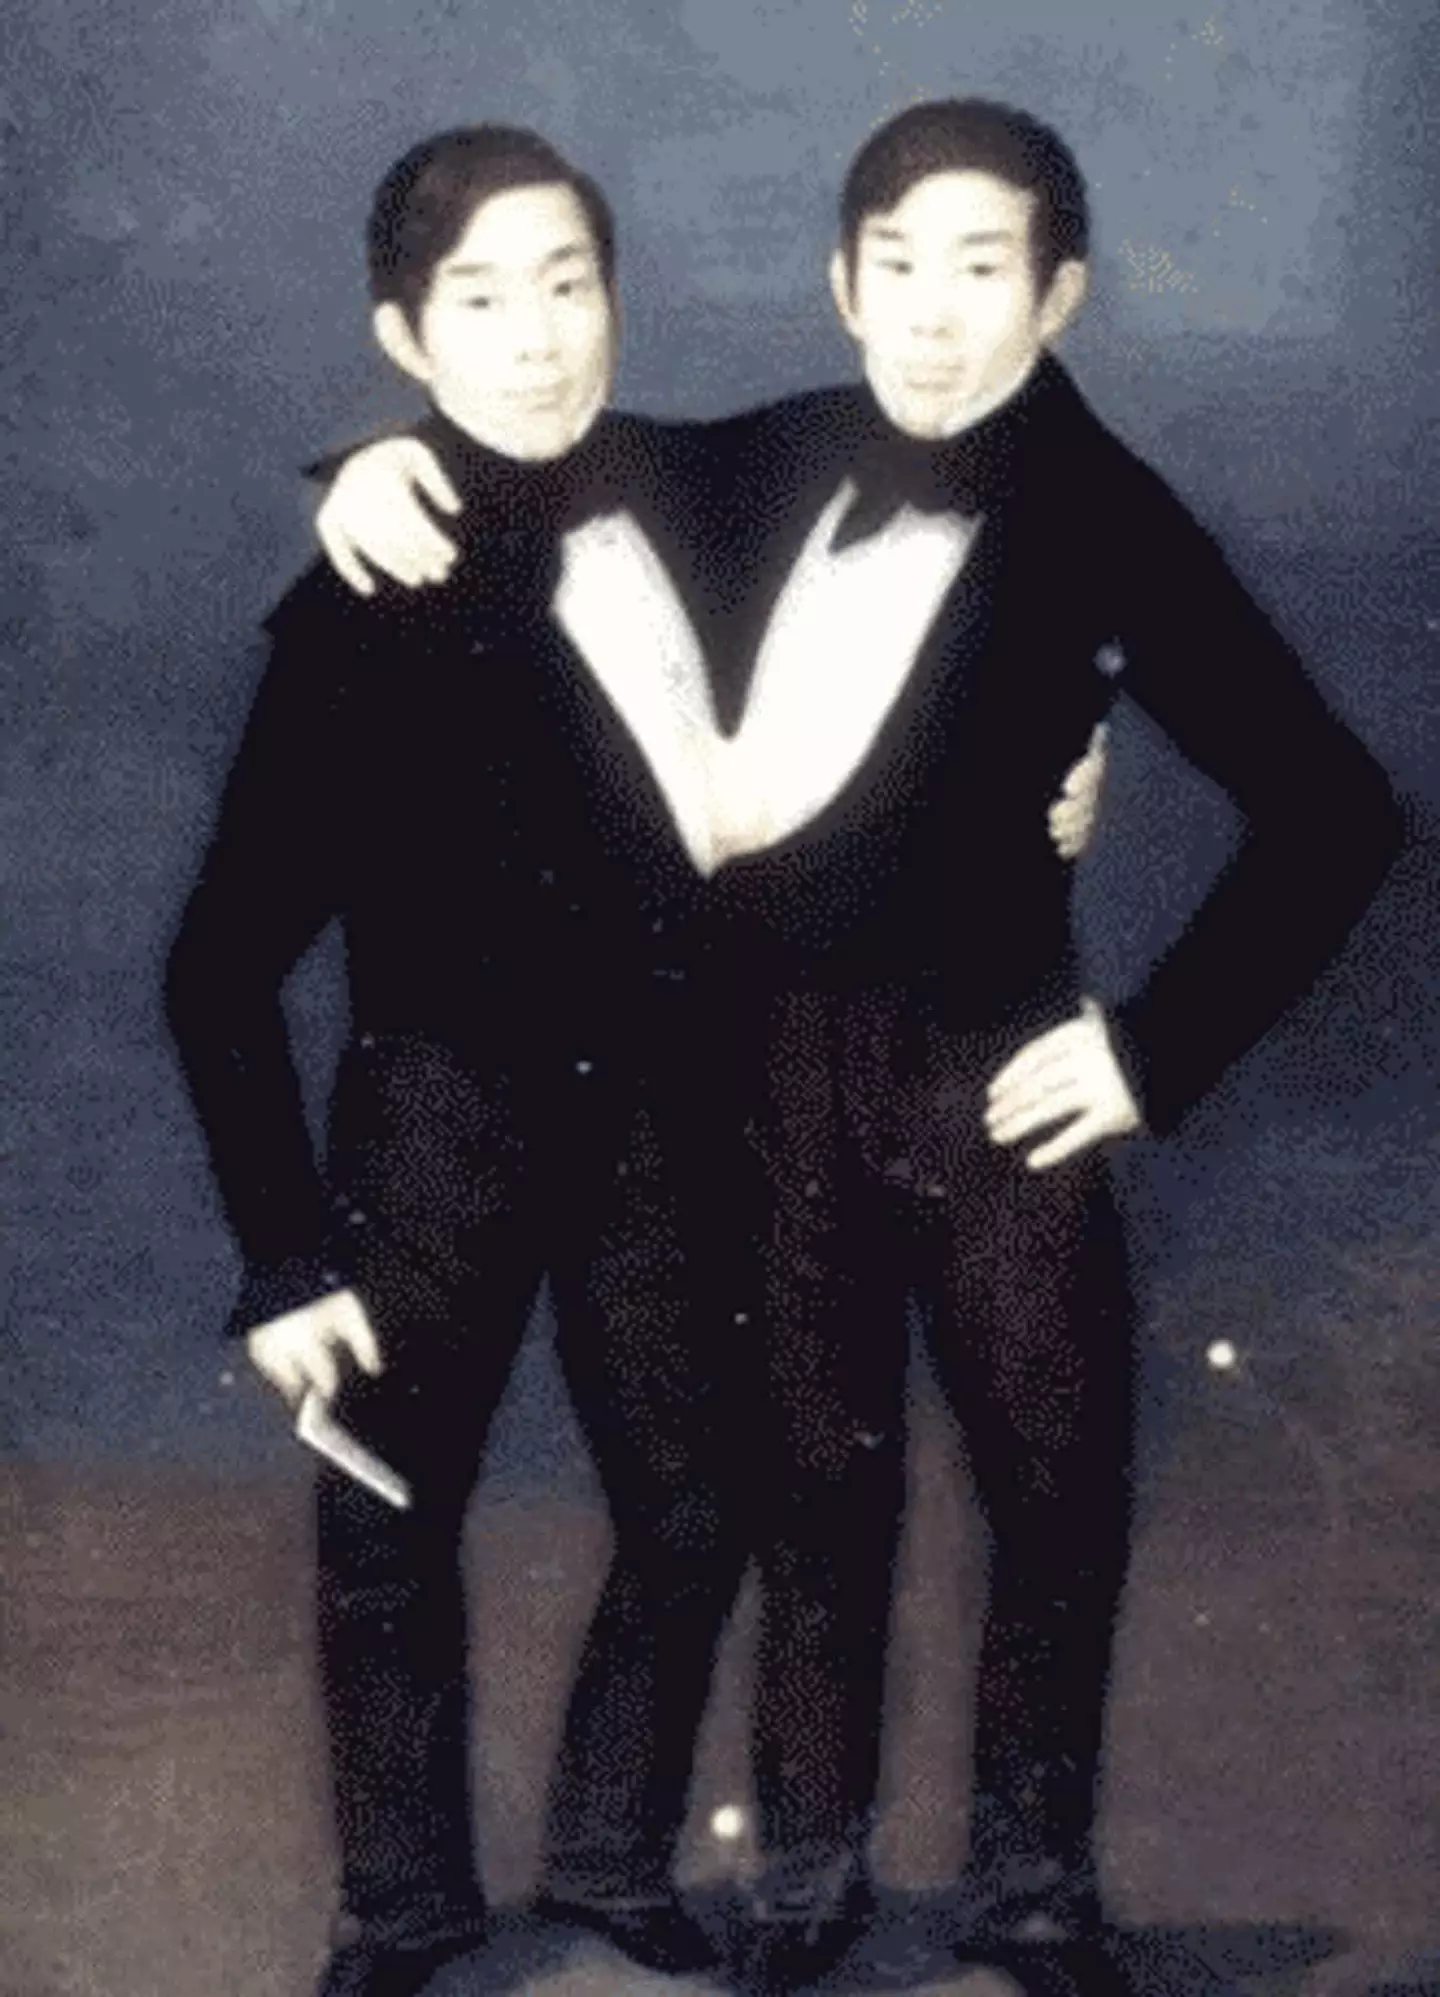 The infamous Siamese twins, Chang and Eng Bunker. (CatherineMunro/Wikimedia Commons/Public Domain)